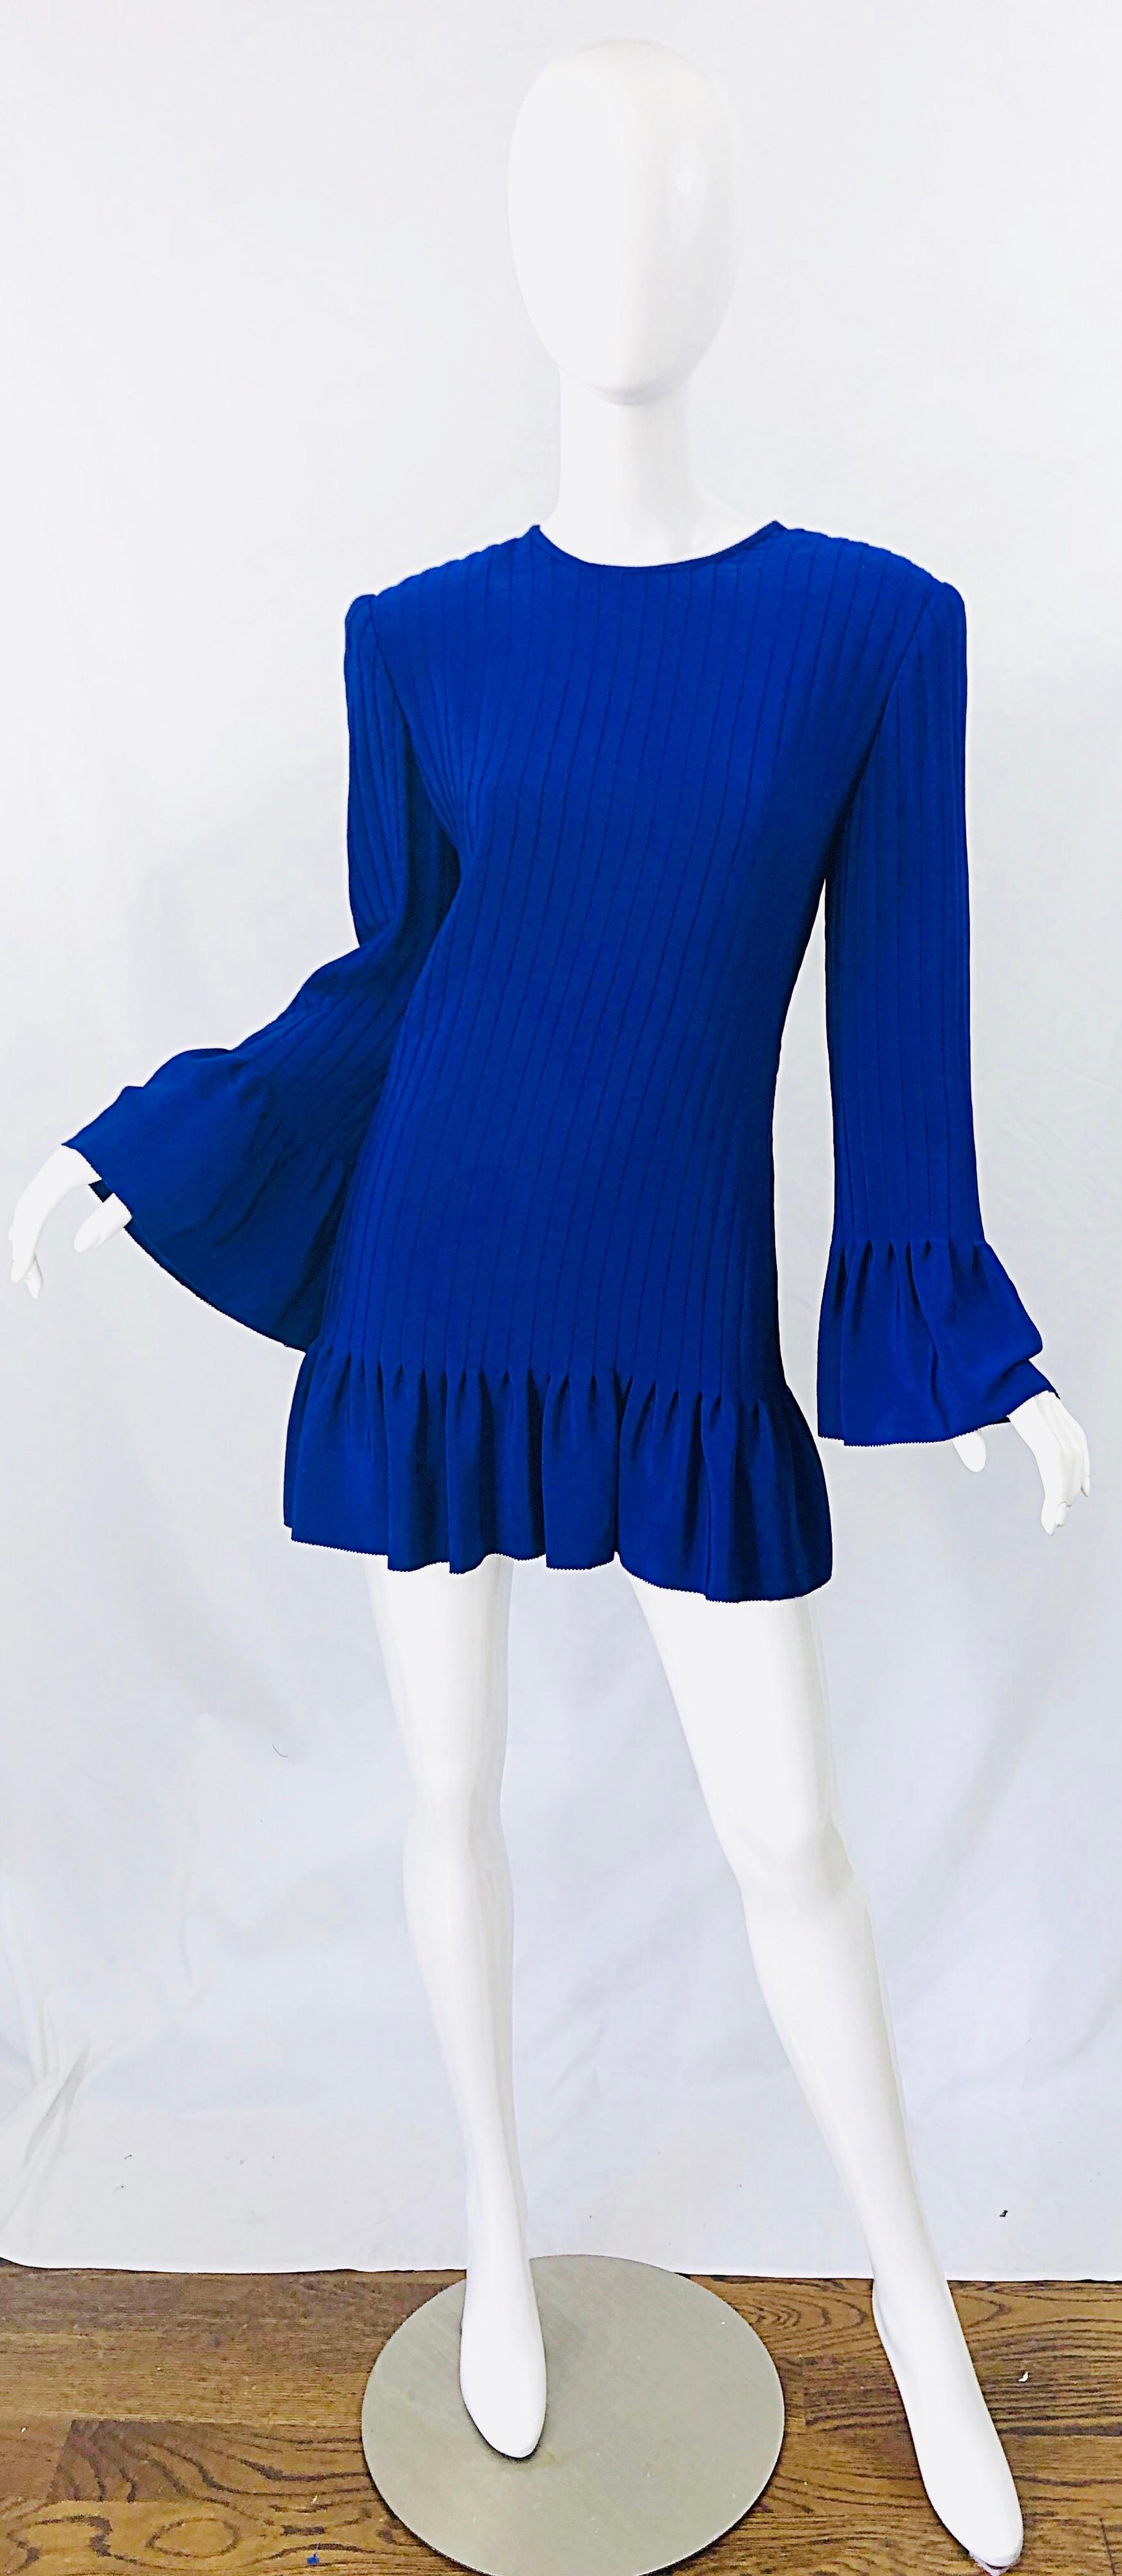 Chic early 1980s TARQUIN EBKER royal blue silk pleated mini dress or tunic top ! Ebker was a high society designer throughout the 60s, 70s, 80s and 90s. His work was known to be couture quality, with heavy attention to details. Hidden zipper up the